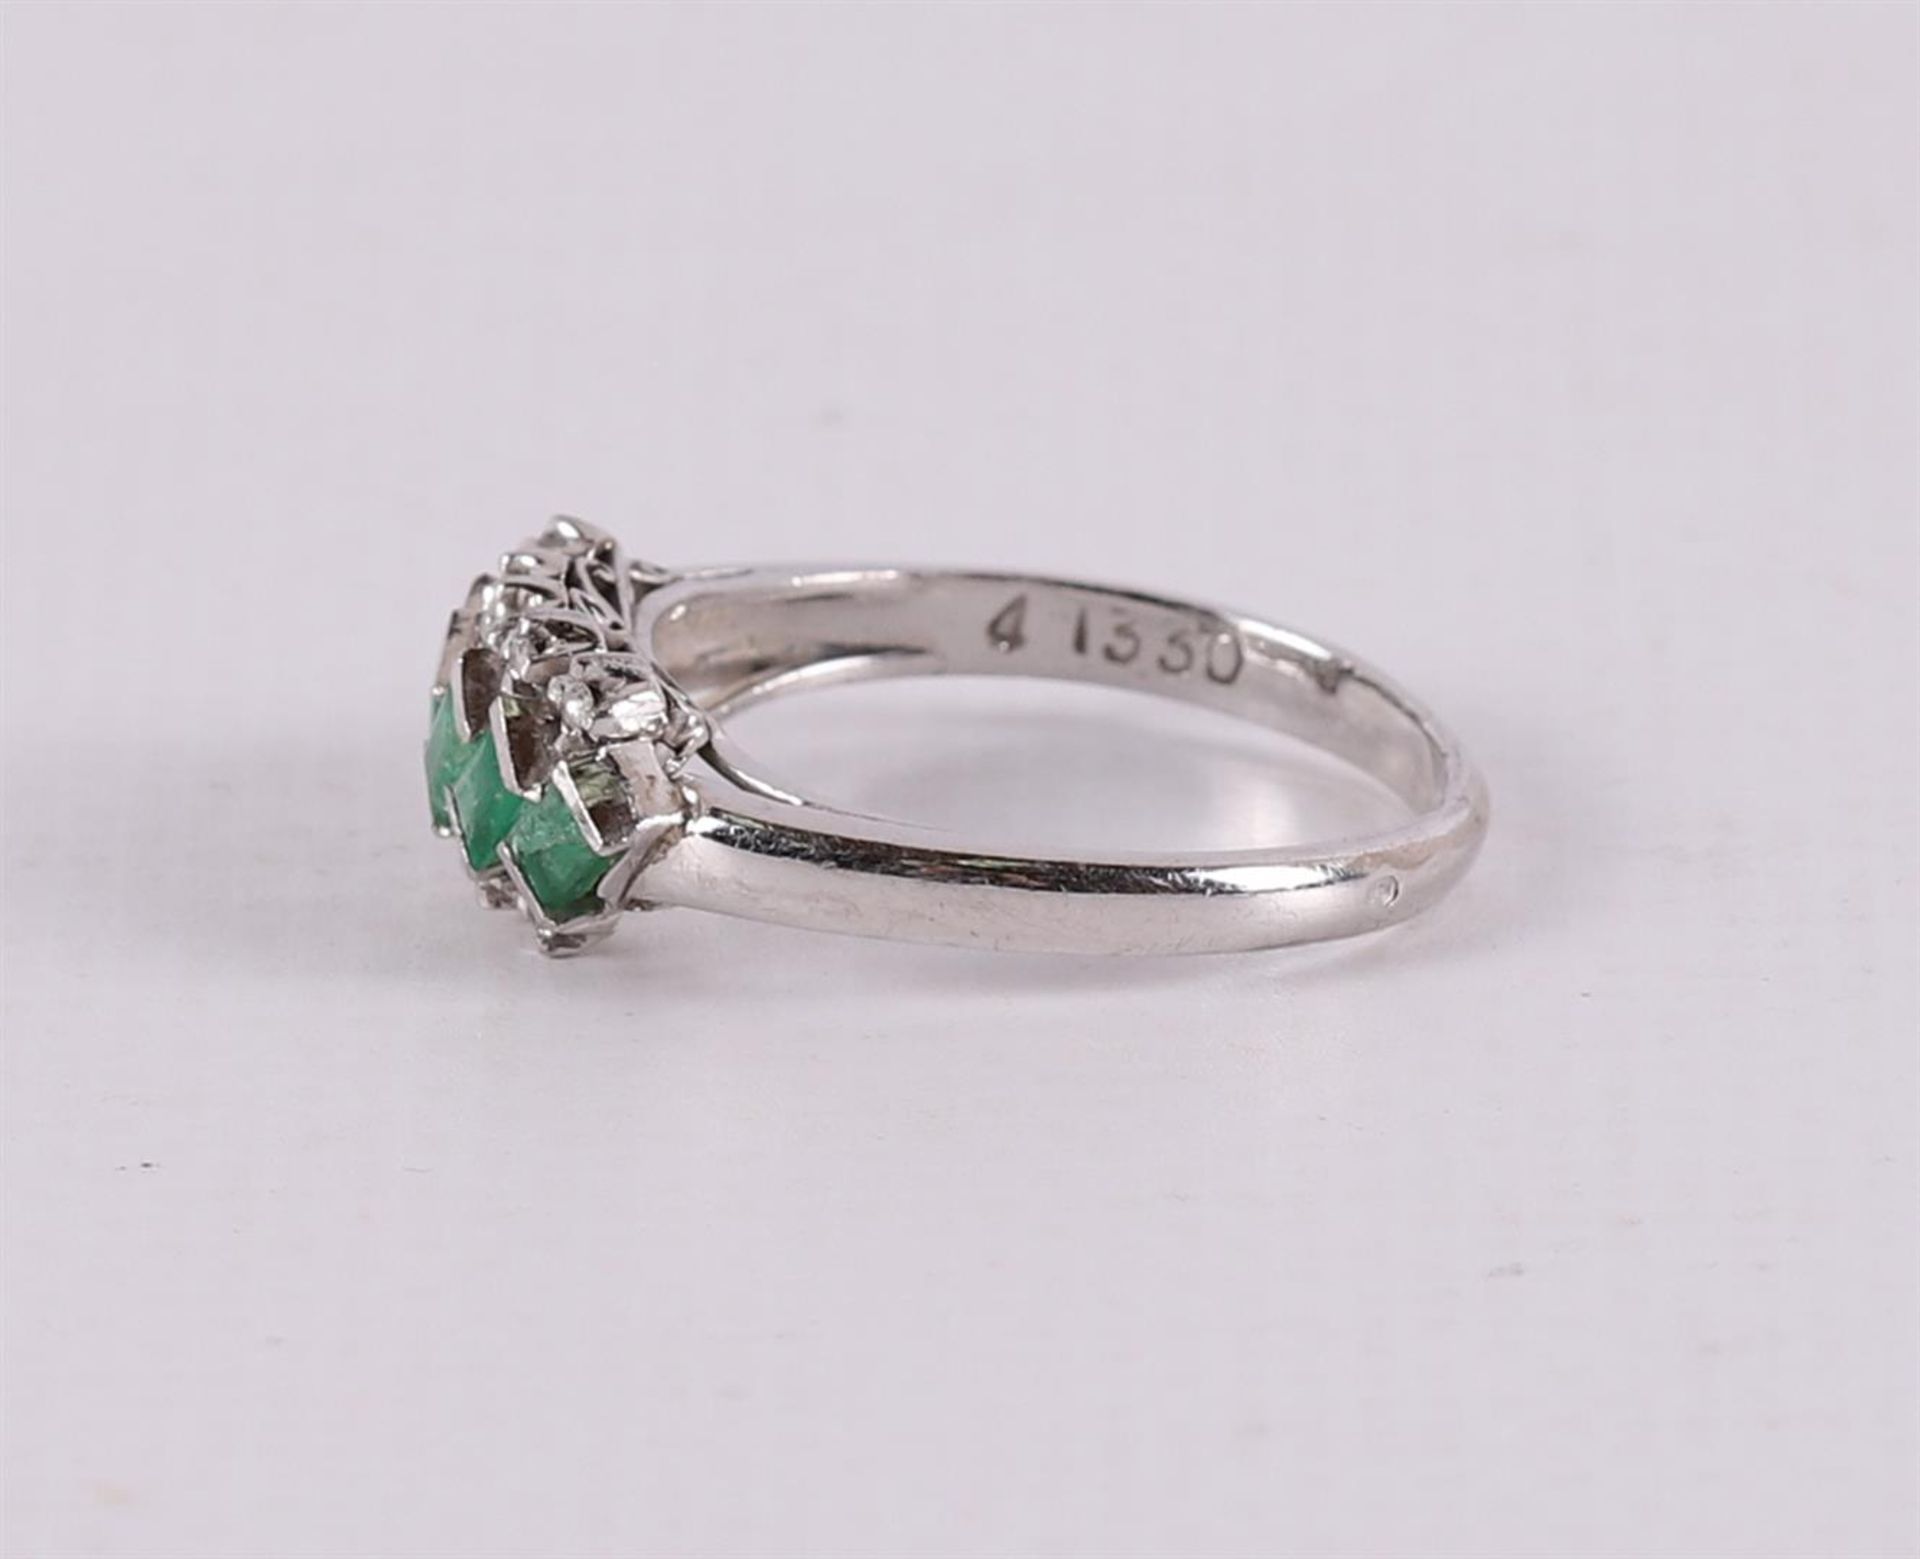 An 18 kt white gold Art Deco ring with 6 cut emeralds and 8 diamonds. - Bild 2 aus 2